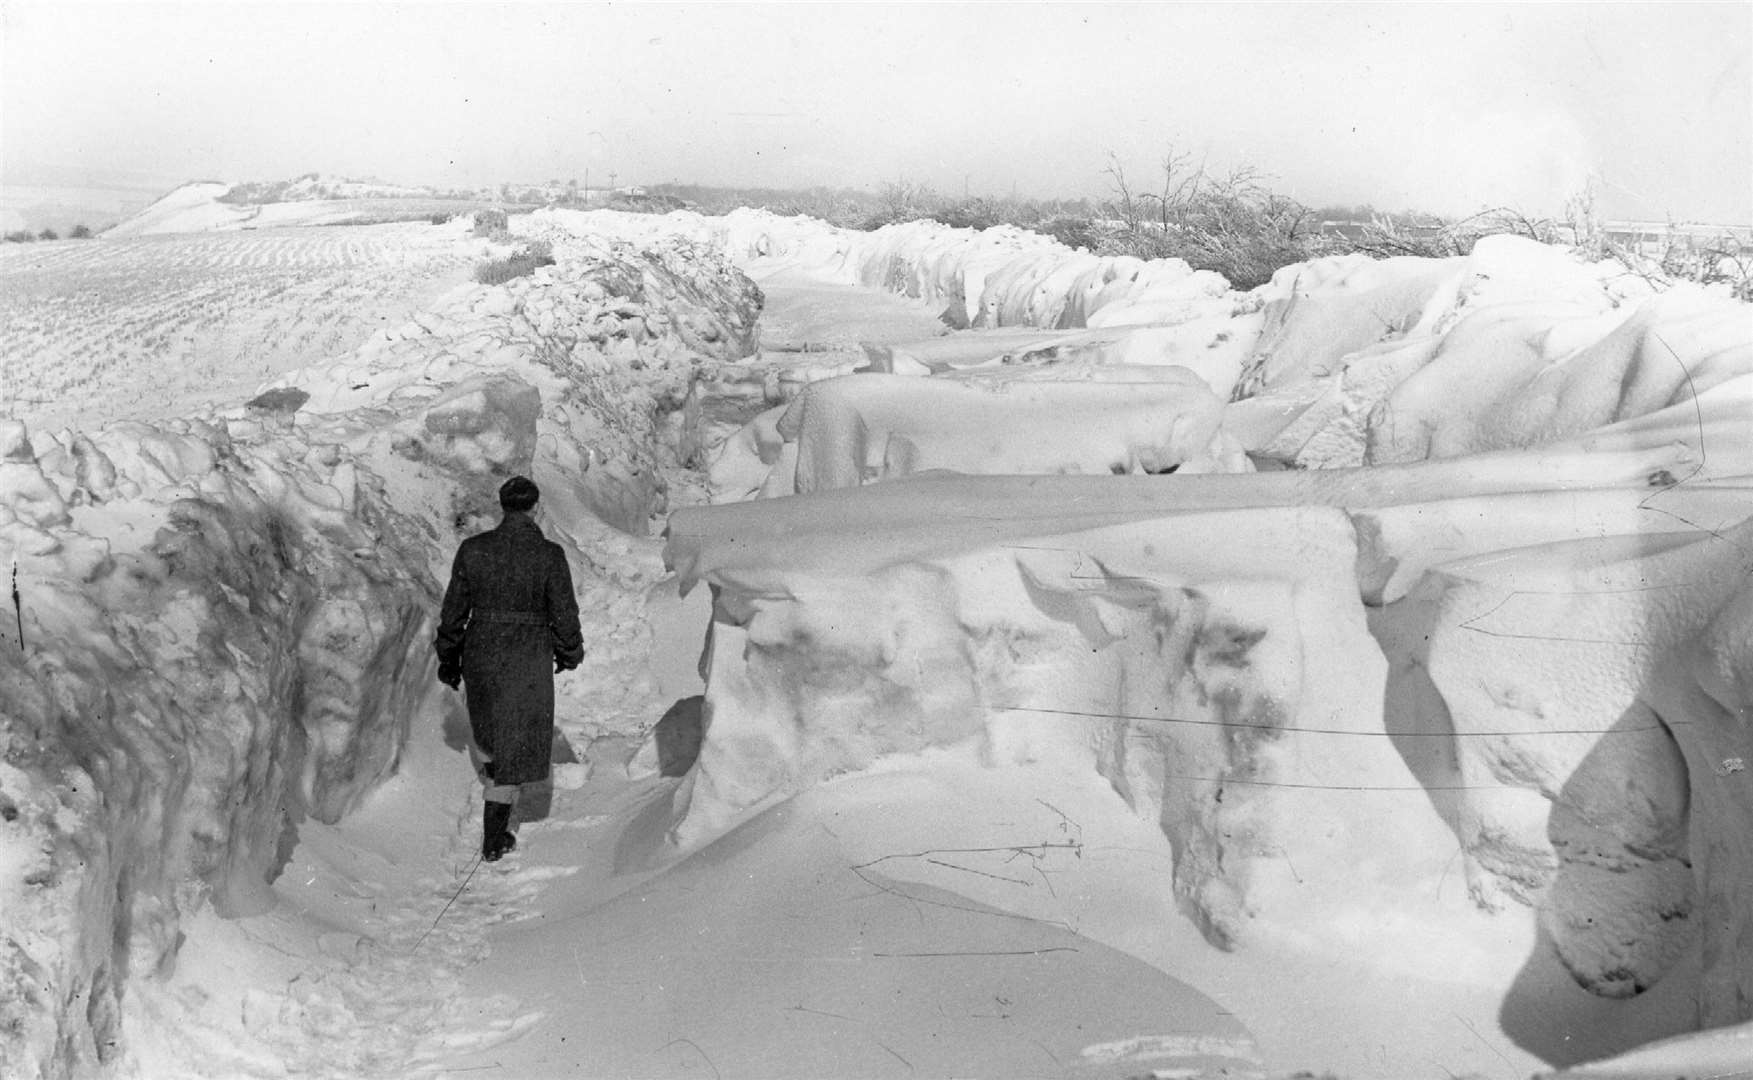 Chatham in 1947 after heavy snow blanketed the county